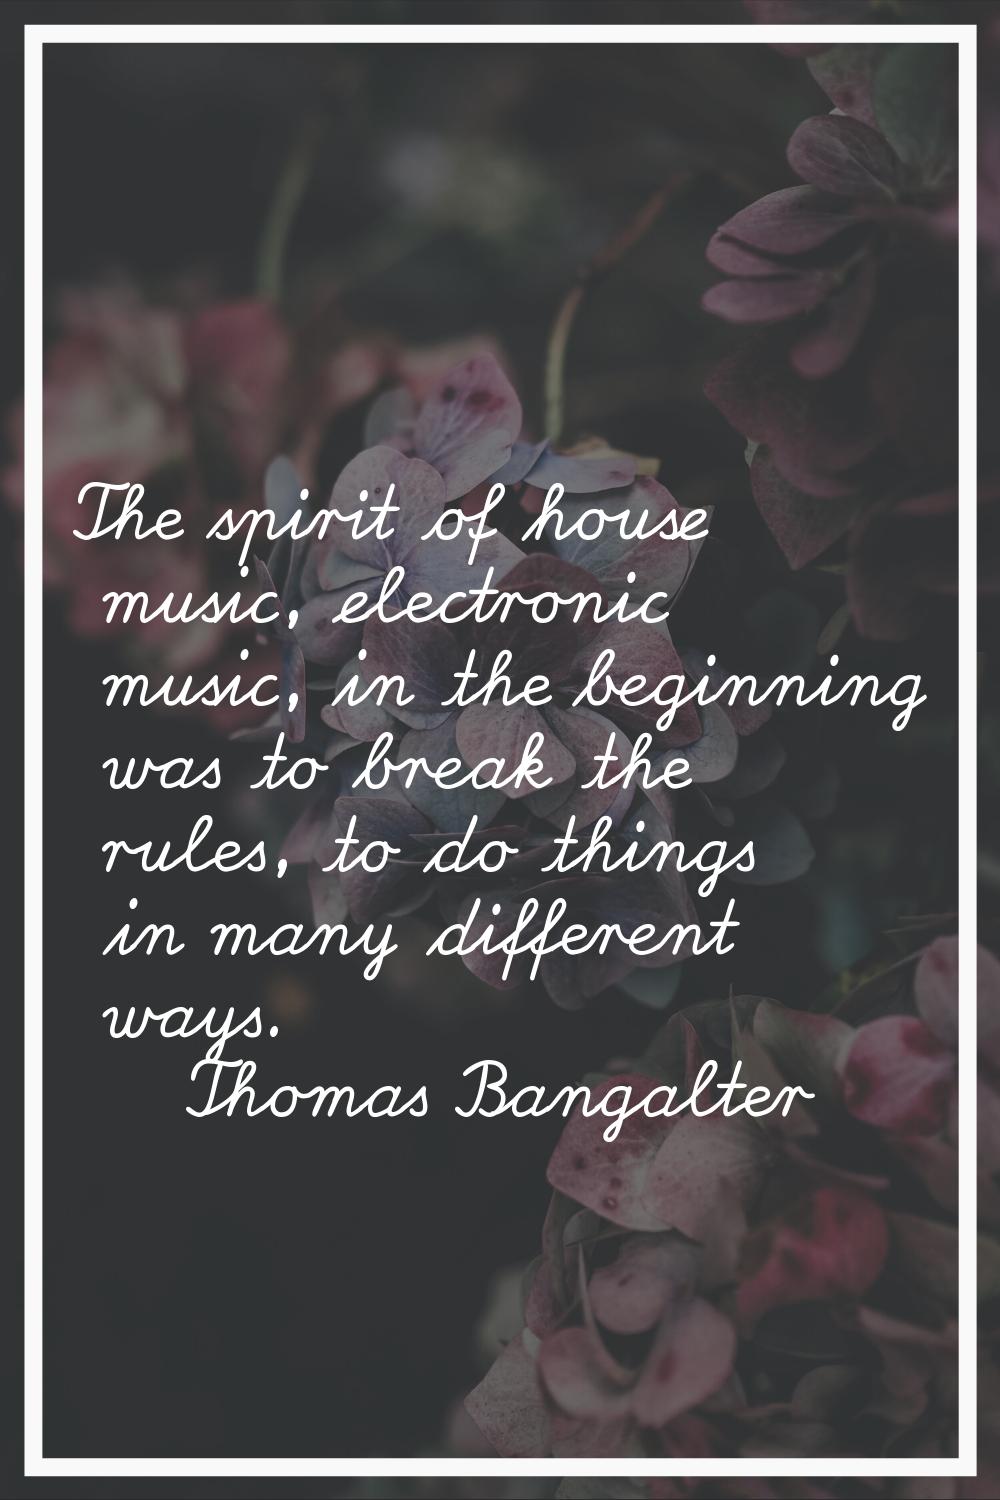 The spirit of house music, electronic music, in the beginning was to break the rules, to do things 